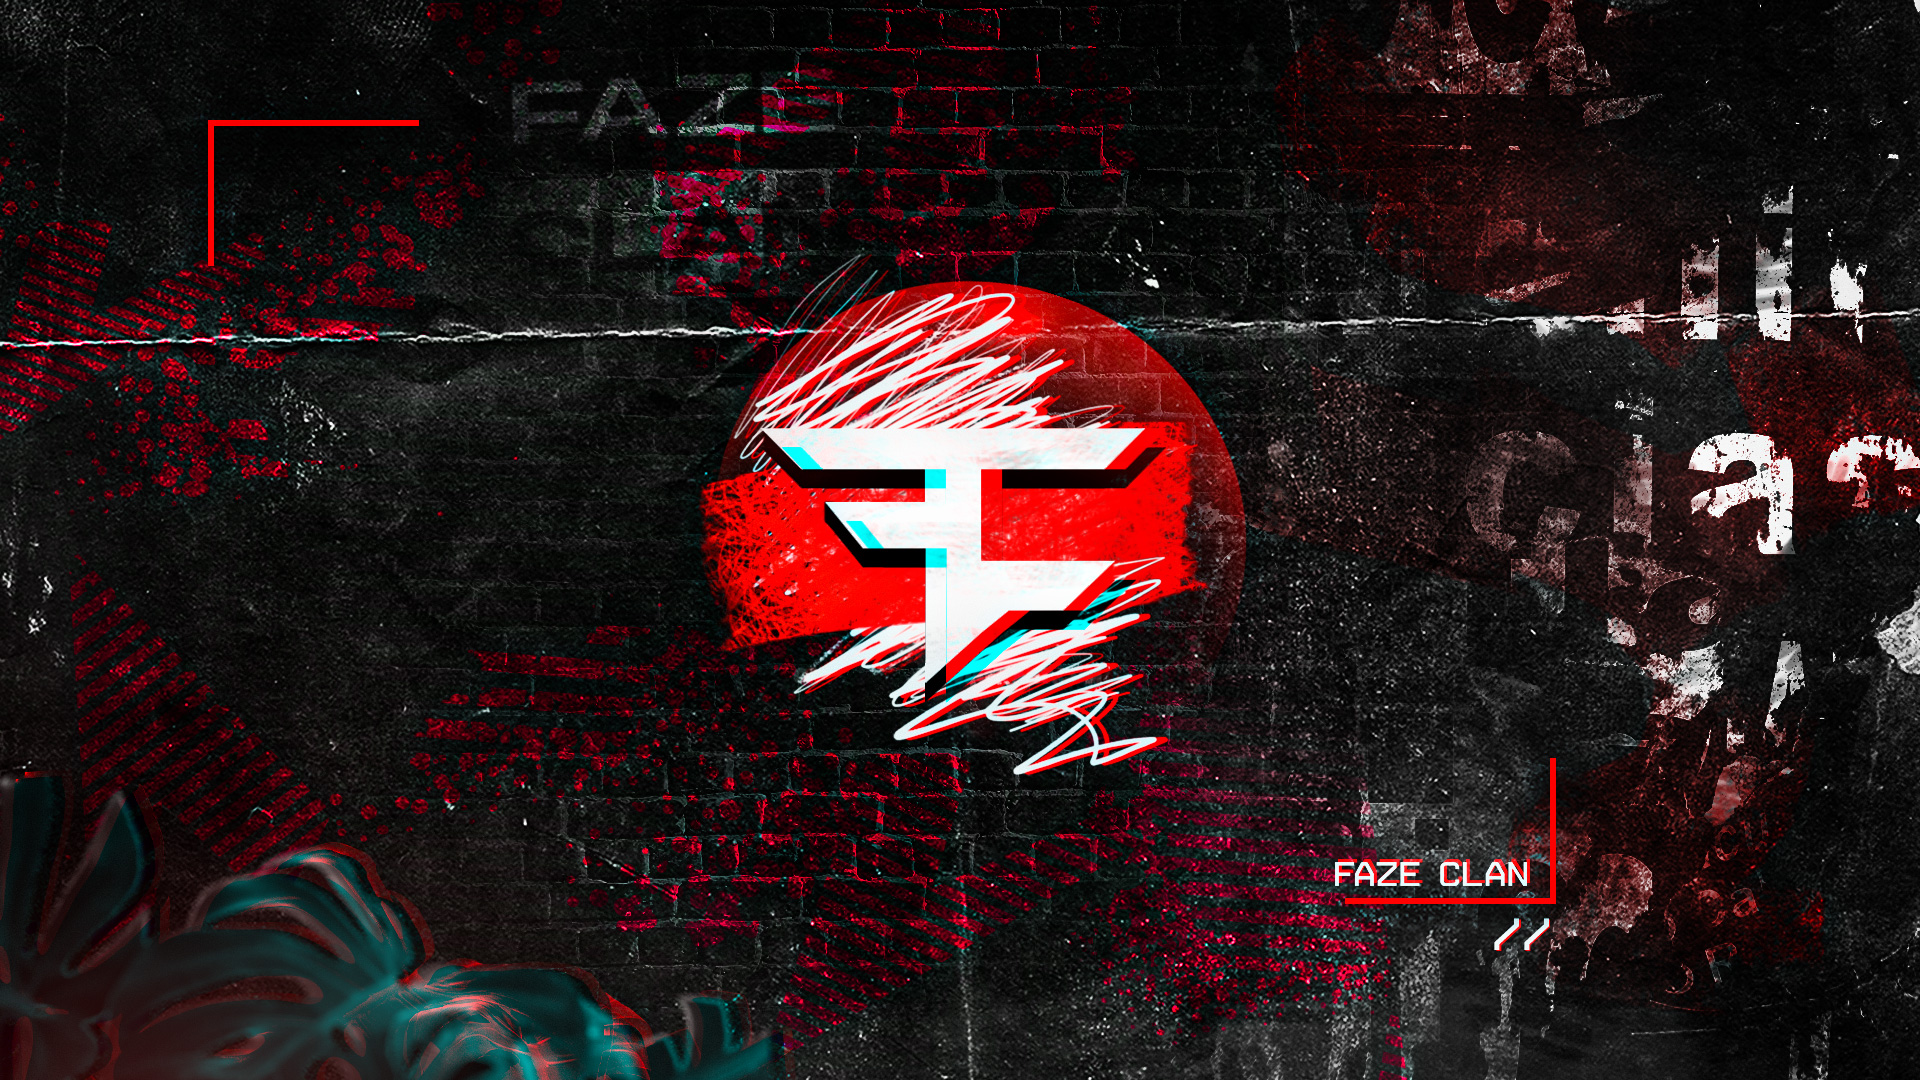 Lewis medz on faze clan wallpaper fazeclan free to use ill put the hd link below lt if you like what you see please consider dropping it a retweet it